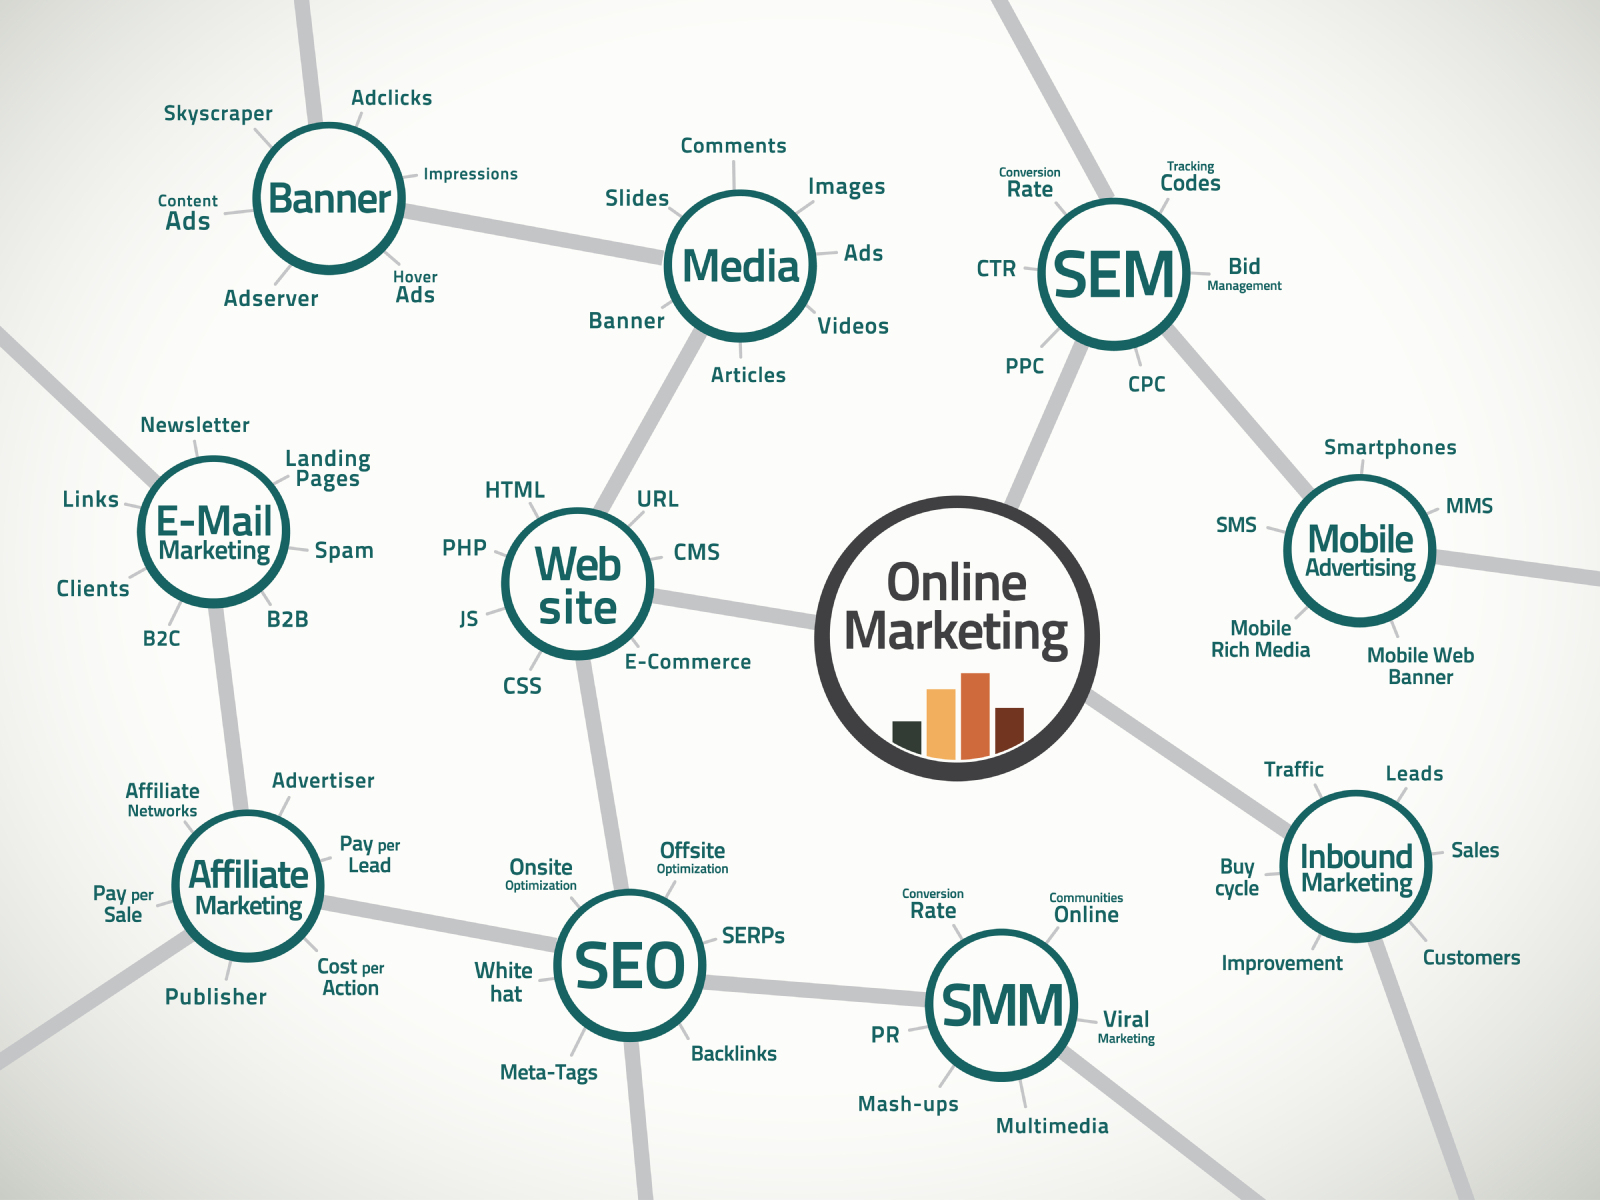 Relevant terms and connections in the online marketing business